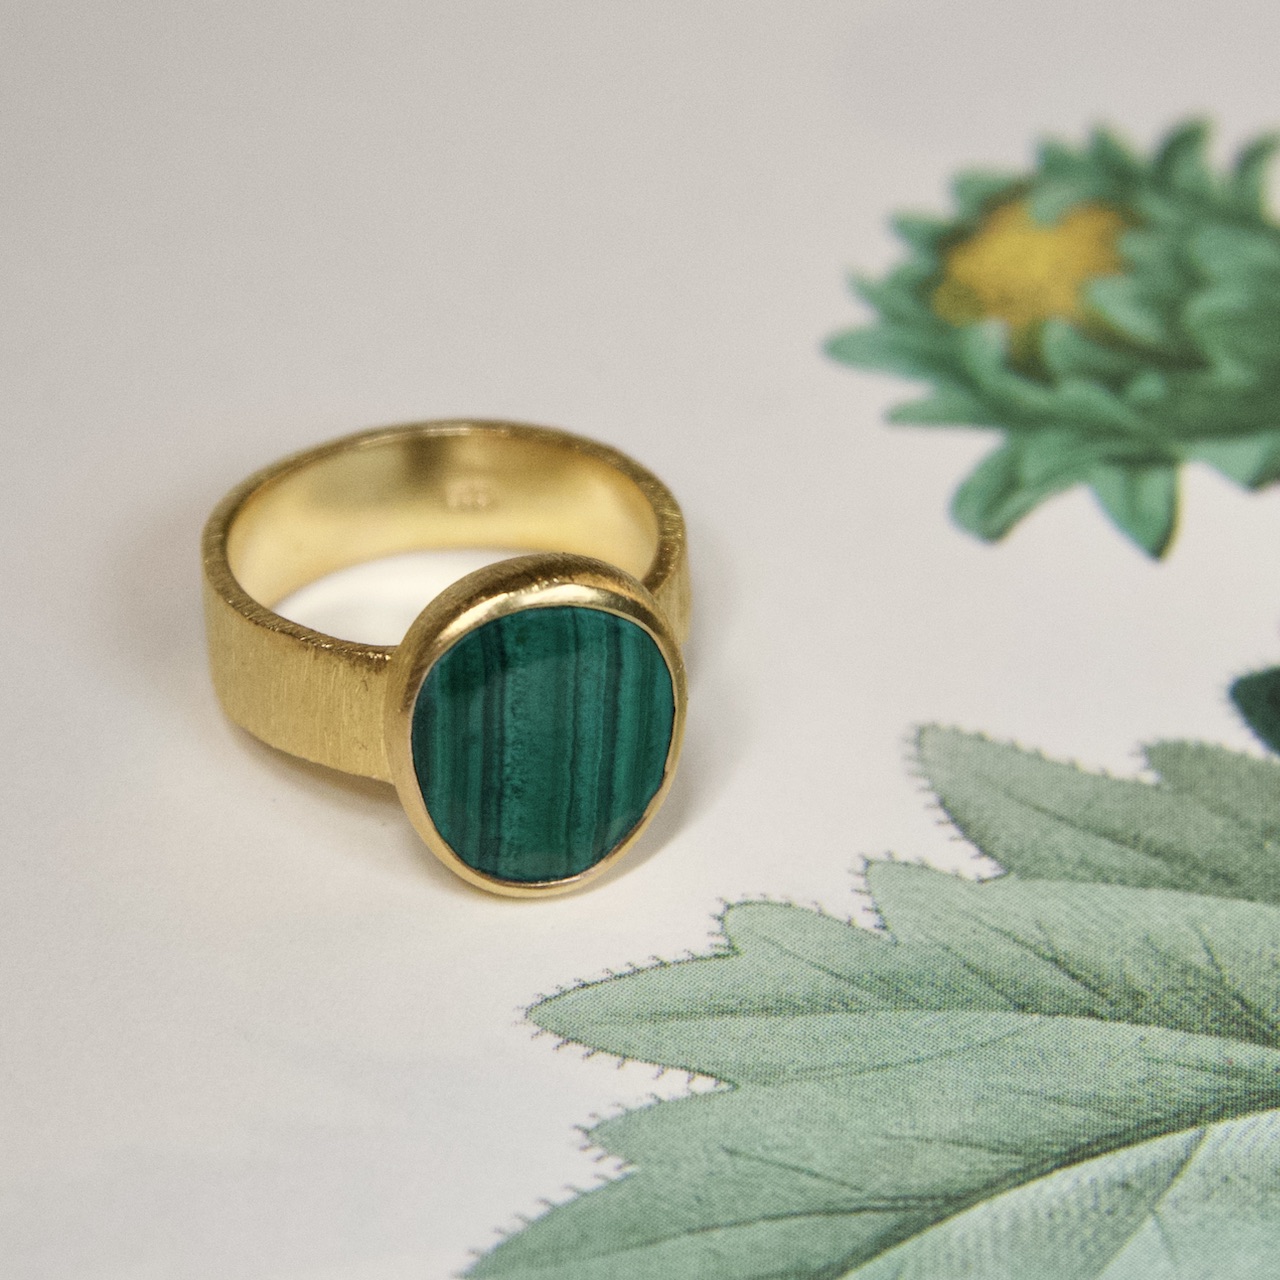 Adjustable Gold Gold Ring, Malachite or Amethyst Oval Stone Ring,  Adjustable Ring, Hammered Ring - Etsy